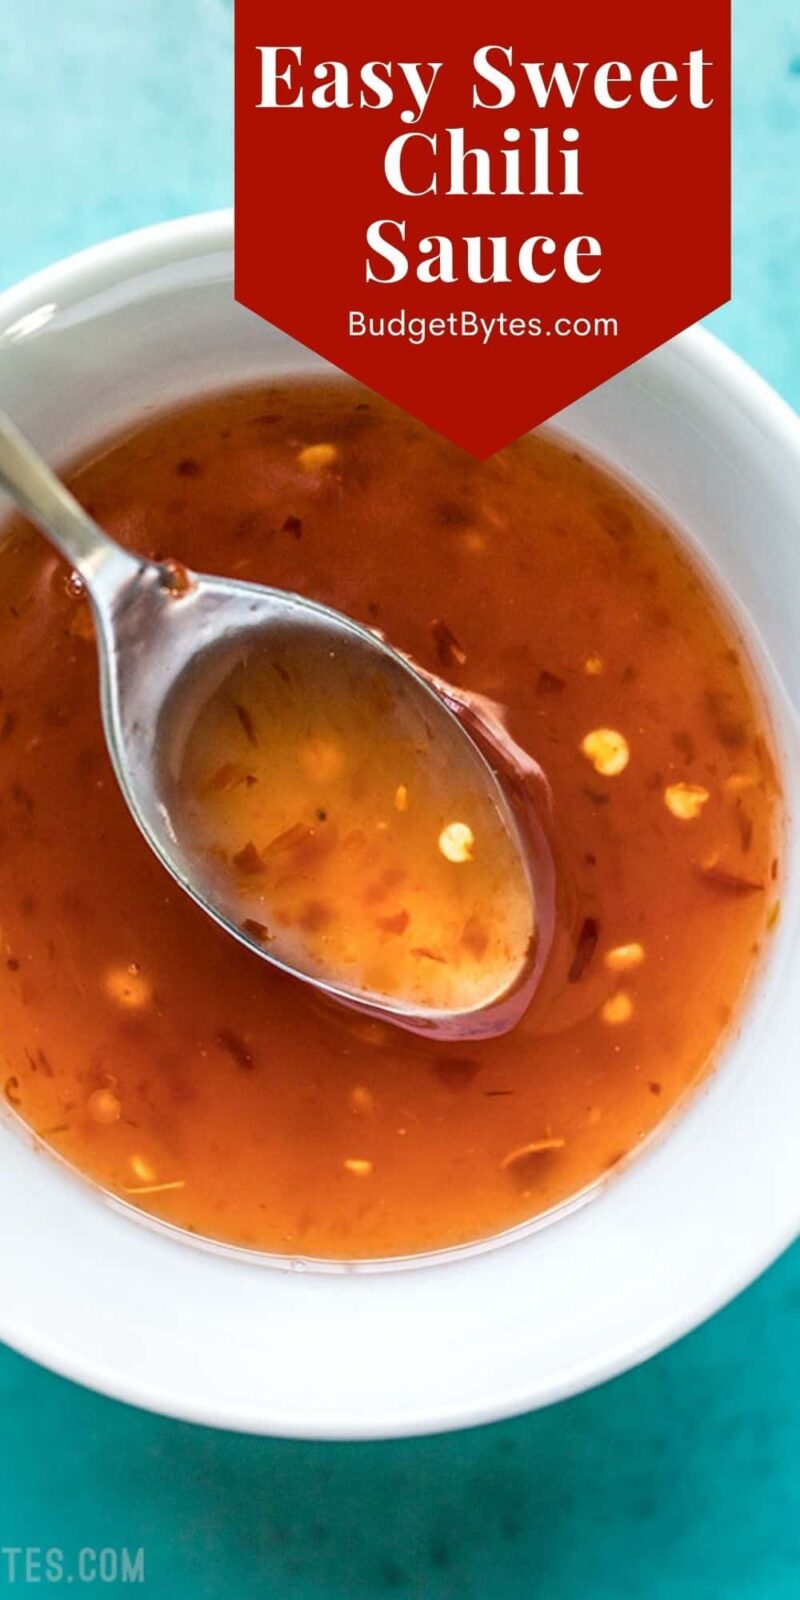 Close up of sweet chili sauce in a bowl with a spoon, title text at the top